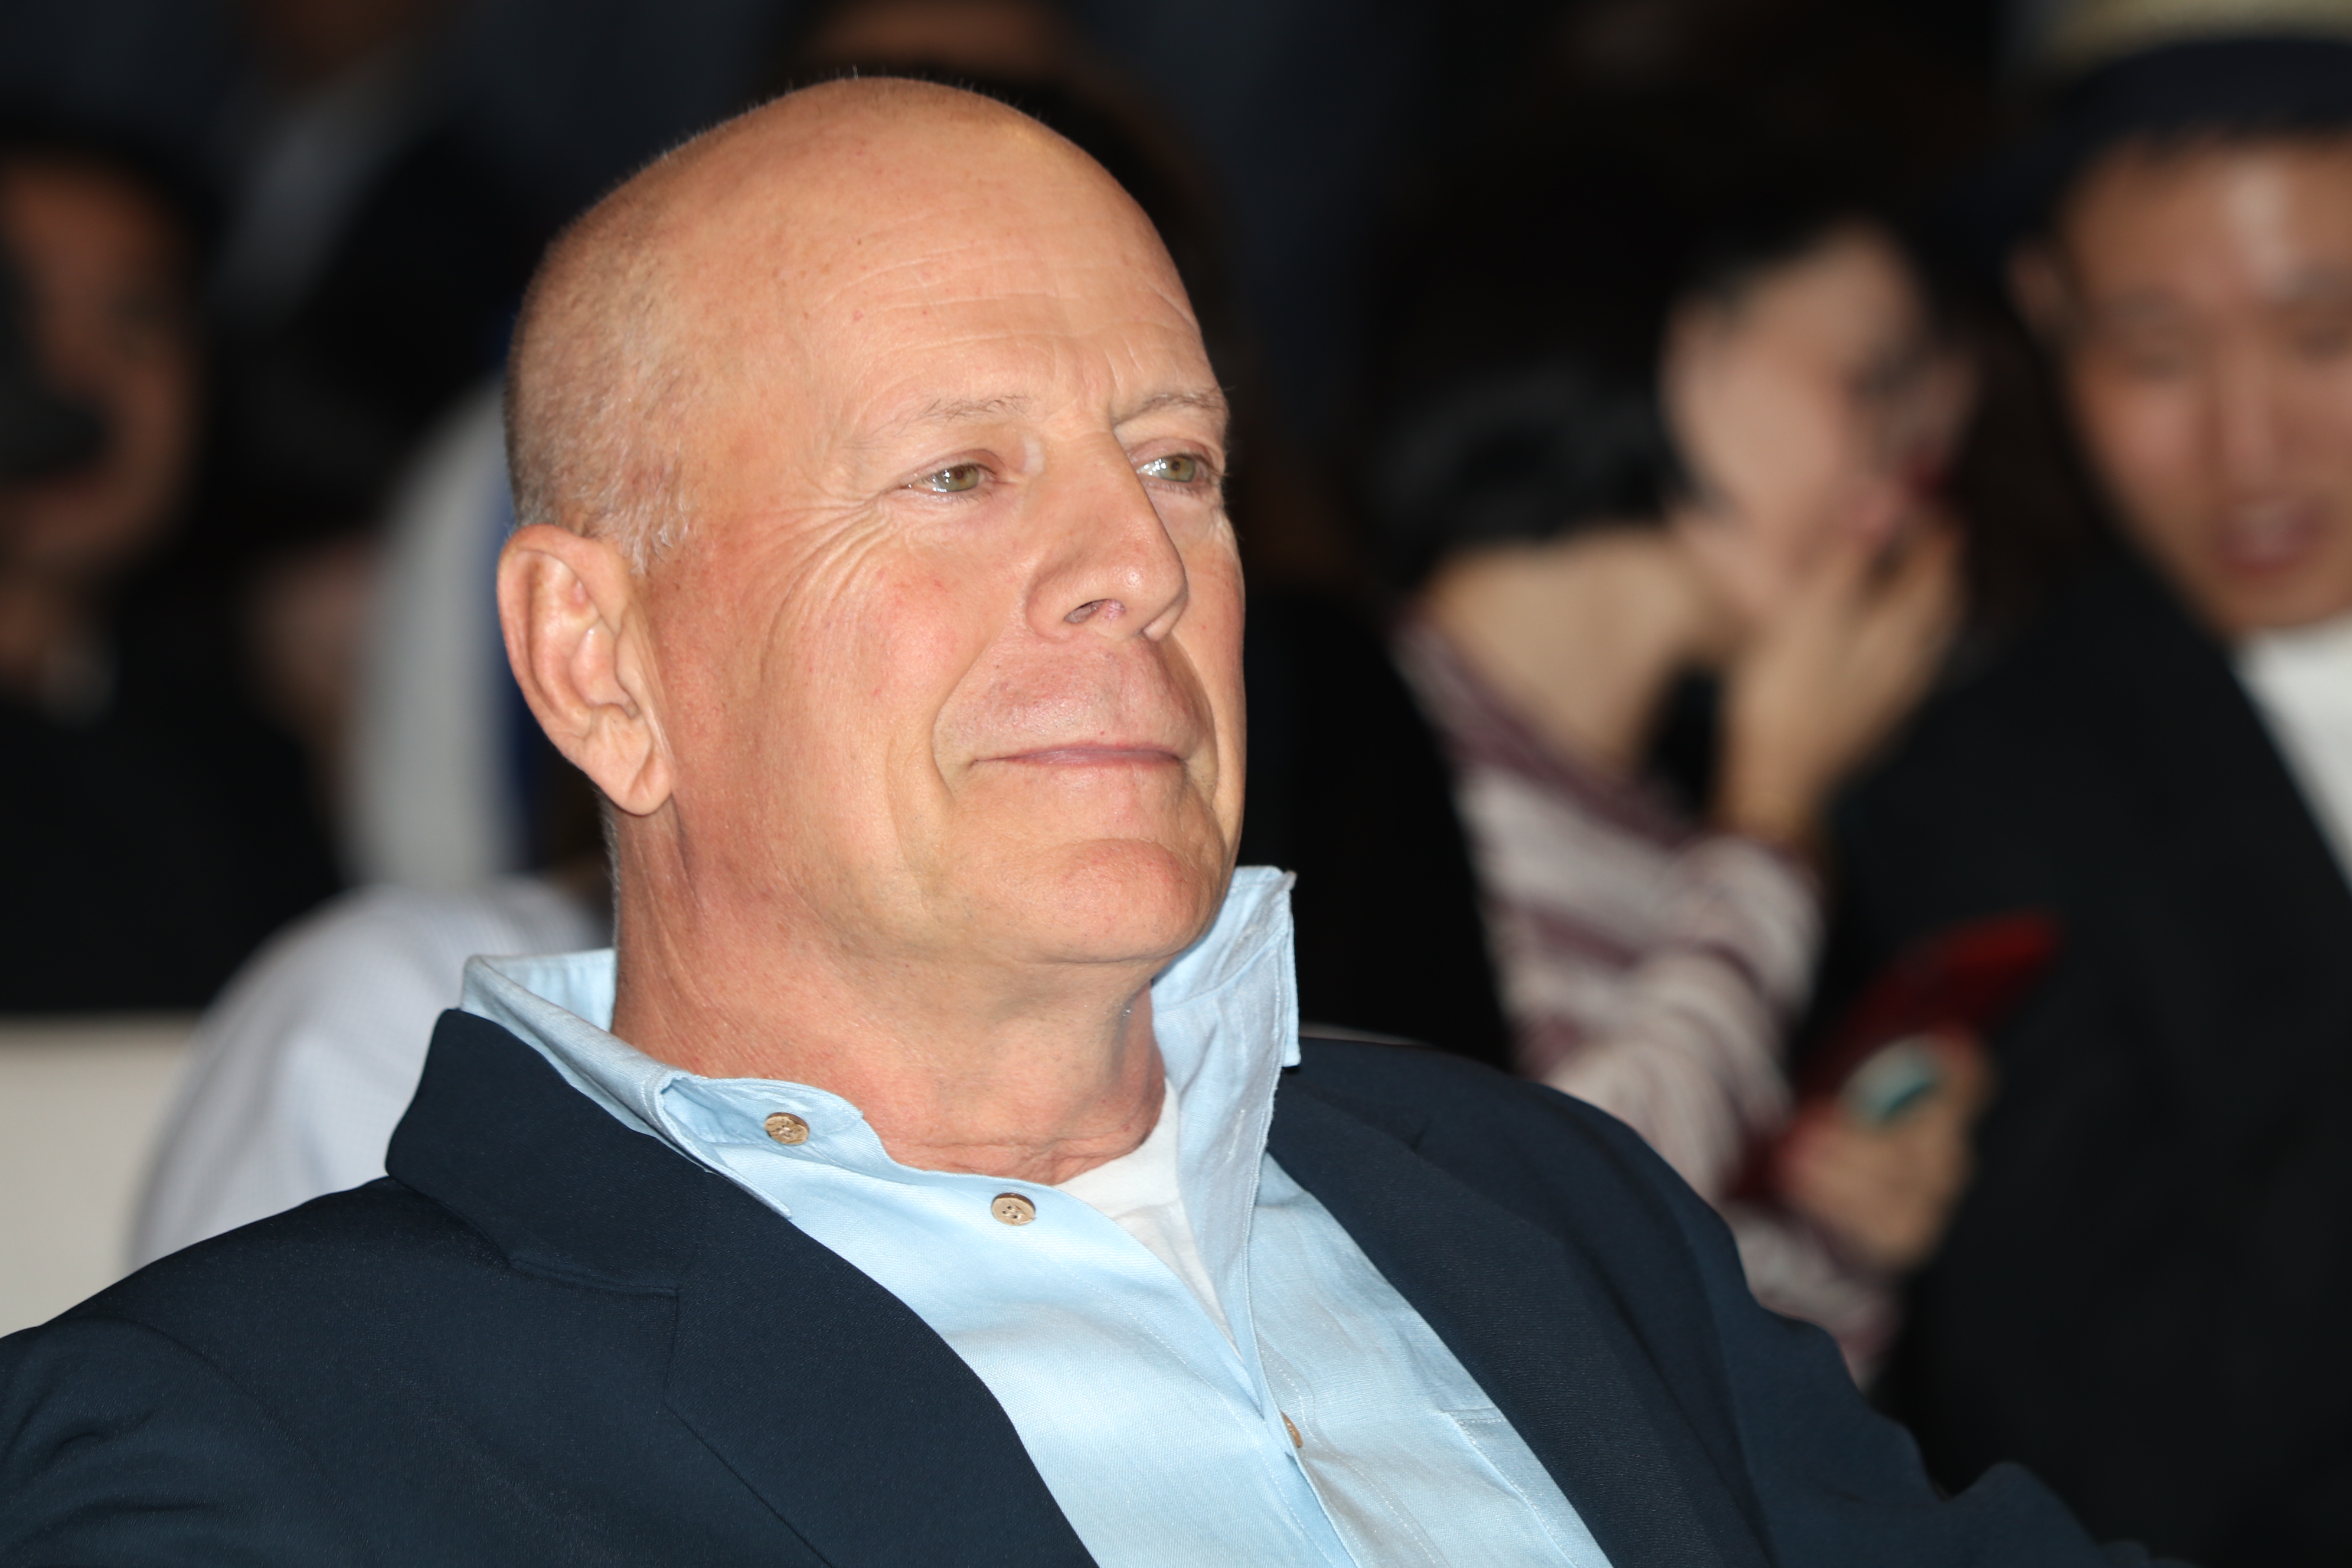 Bruce Willis attends CocoBaba and Ushopal activity on November 4, 2019, in Shanghai, China. | Source: Getty Images